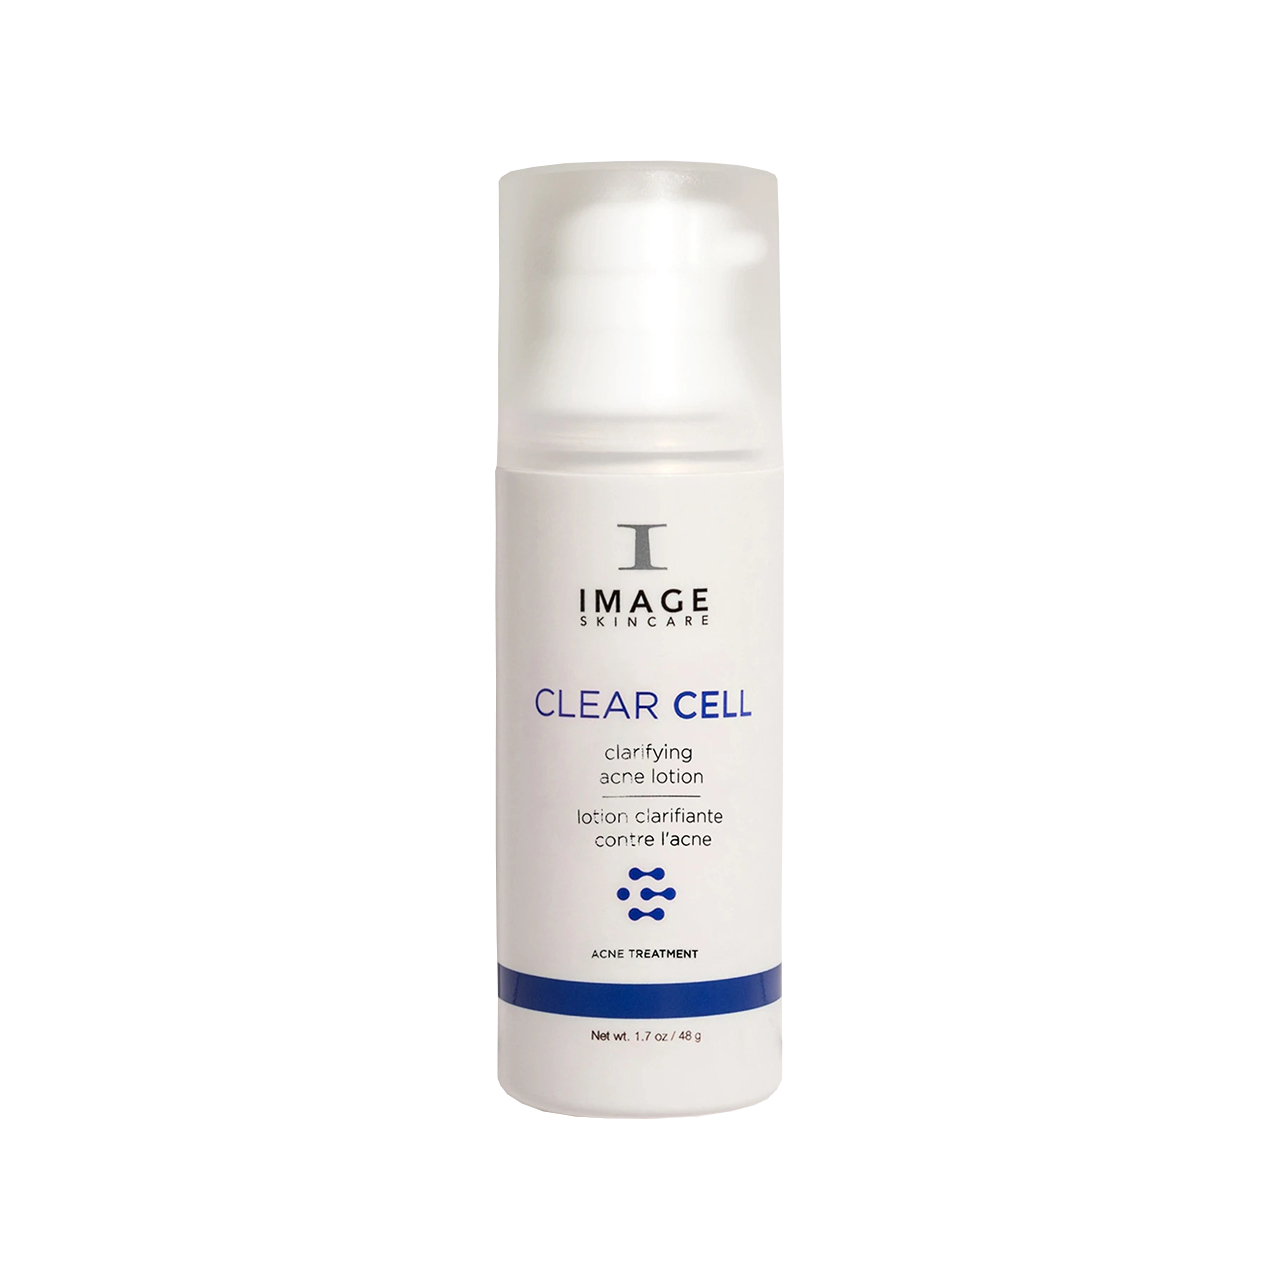 Image Skincare Clear Cell Medicated Acne Lotion - 1.7 oz (CC-201) (01653) Exp:2/24 Questions & Answers